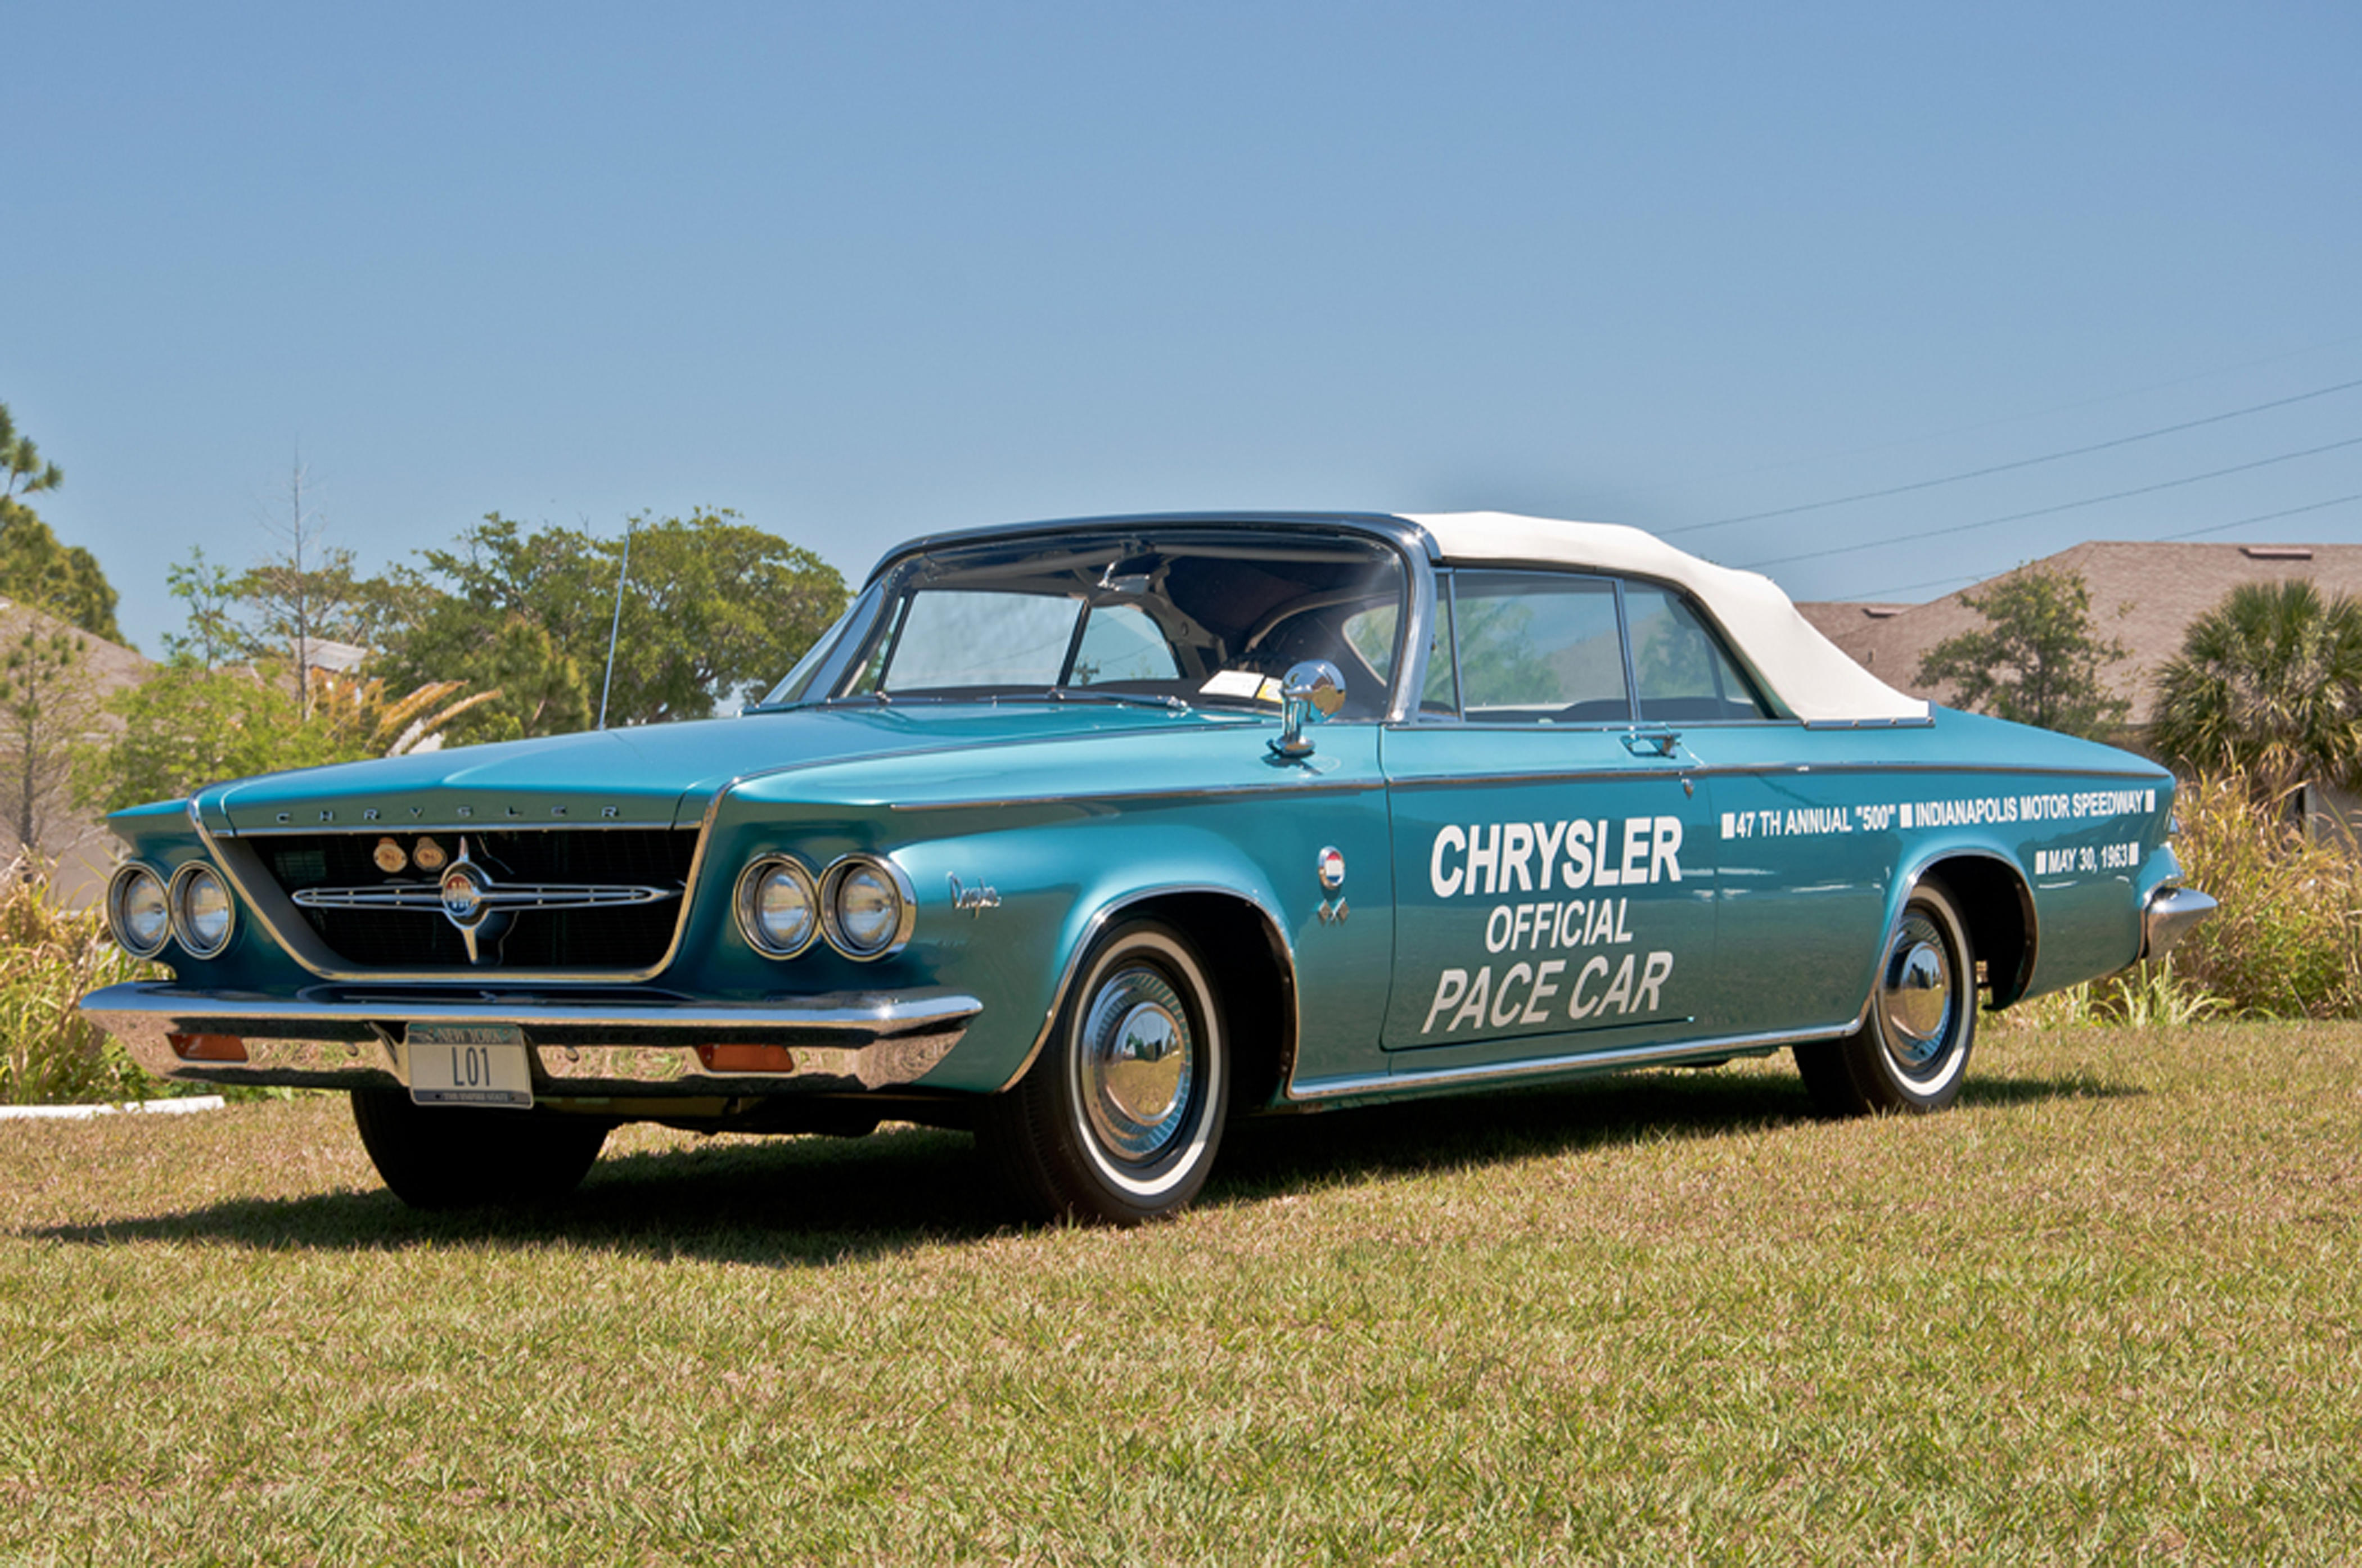 192-G 1963 CHRYSLER INDIANAPOLIS 500 Pace Car Photo 